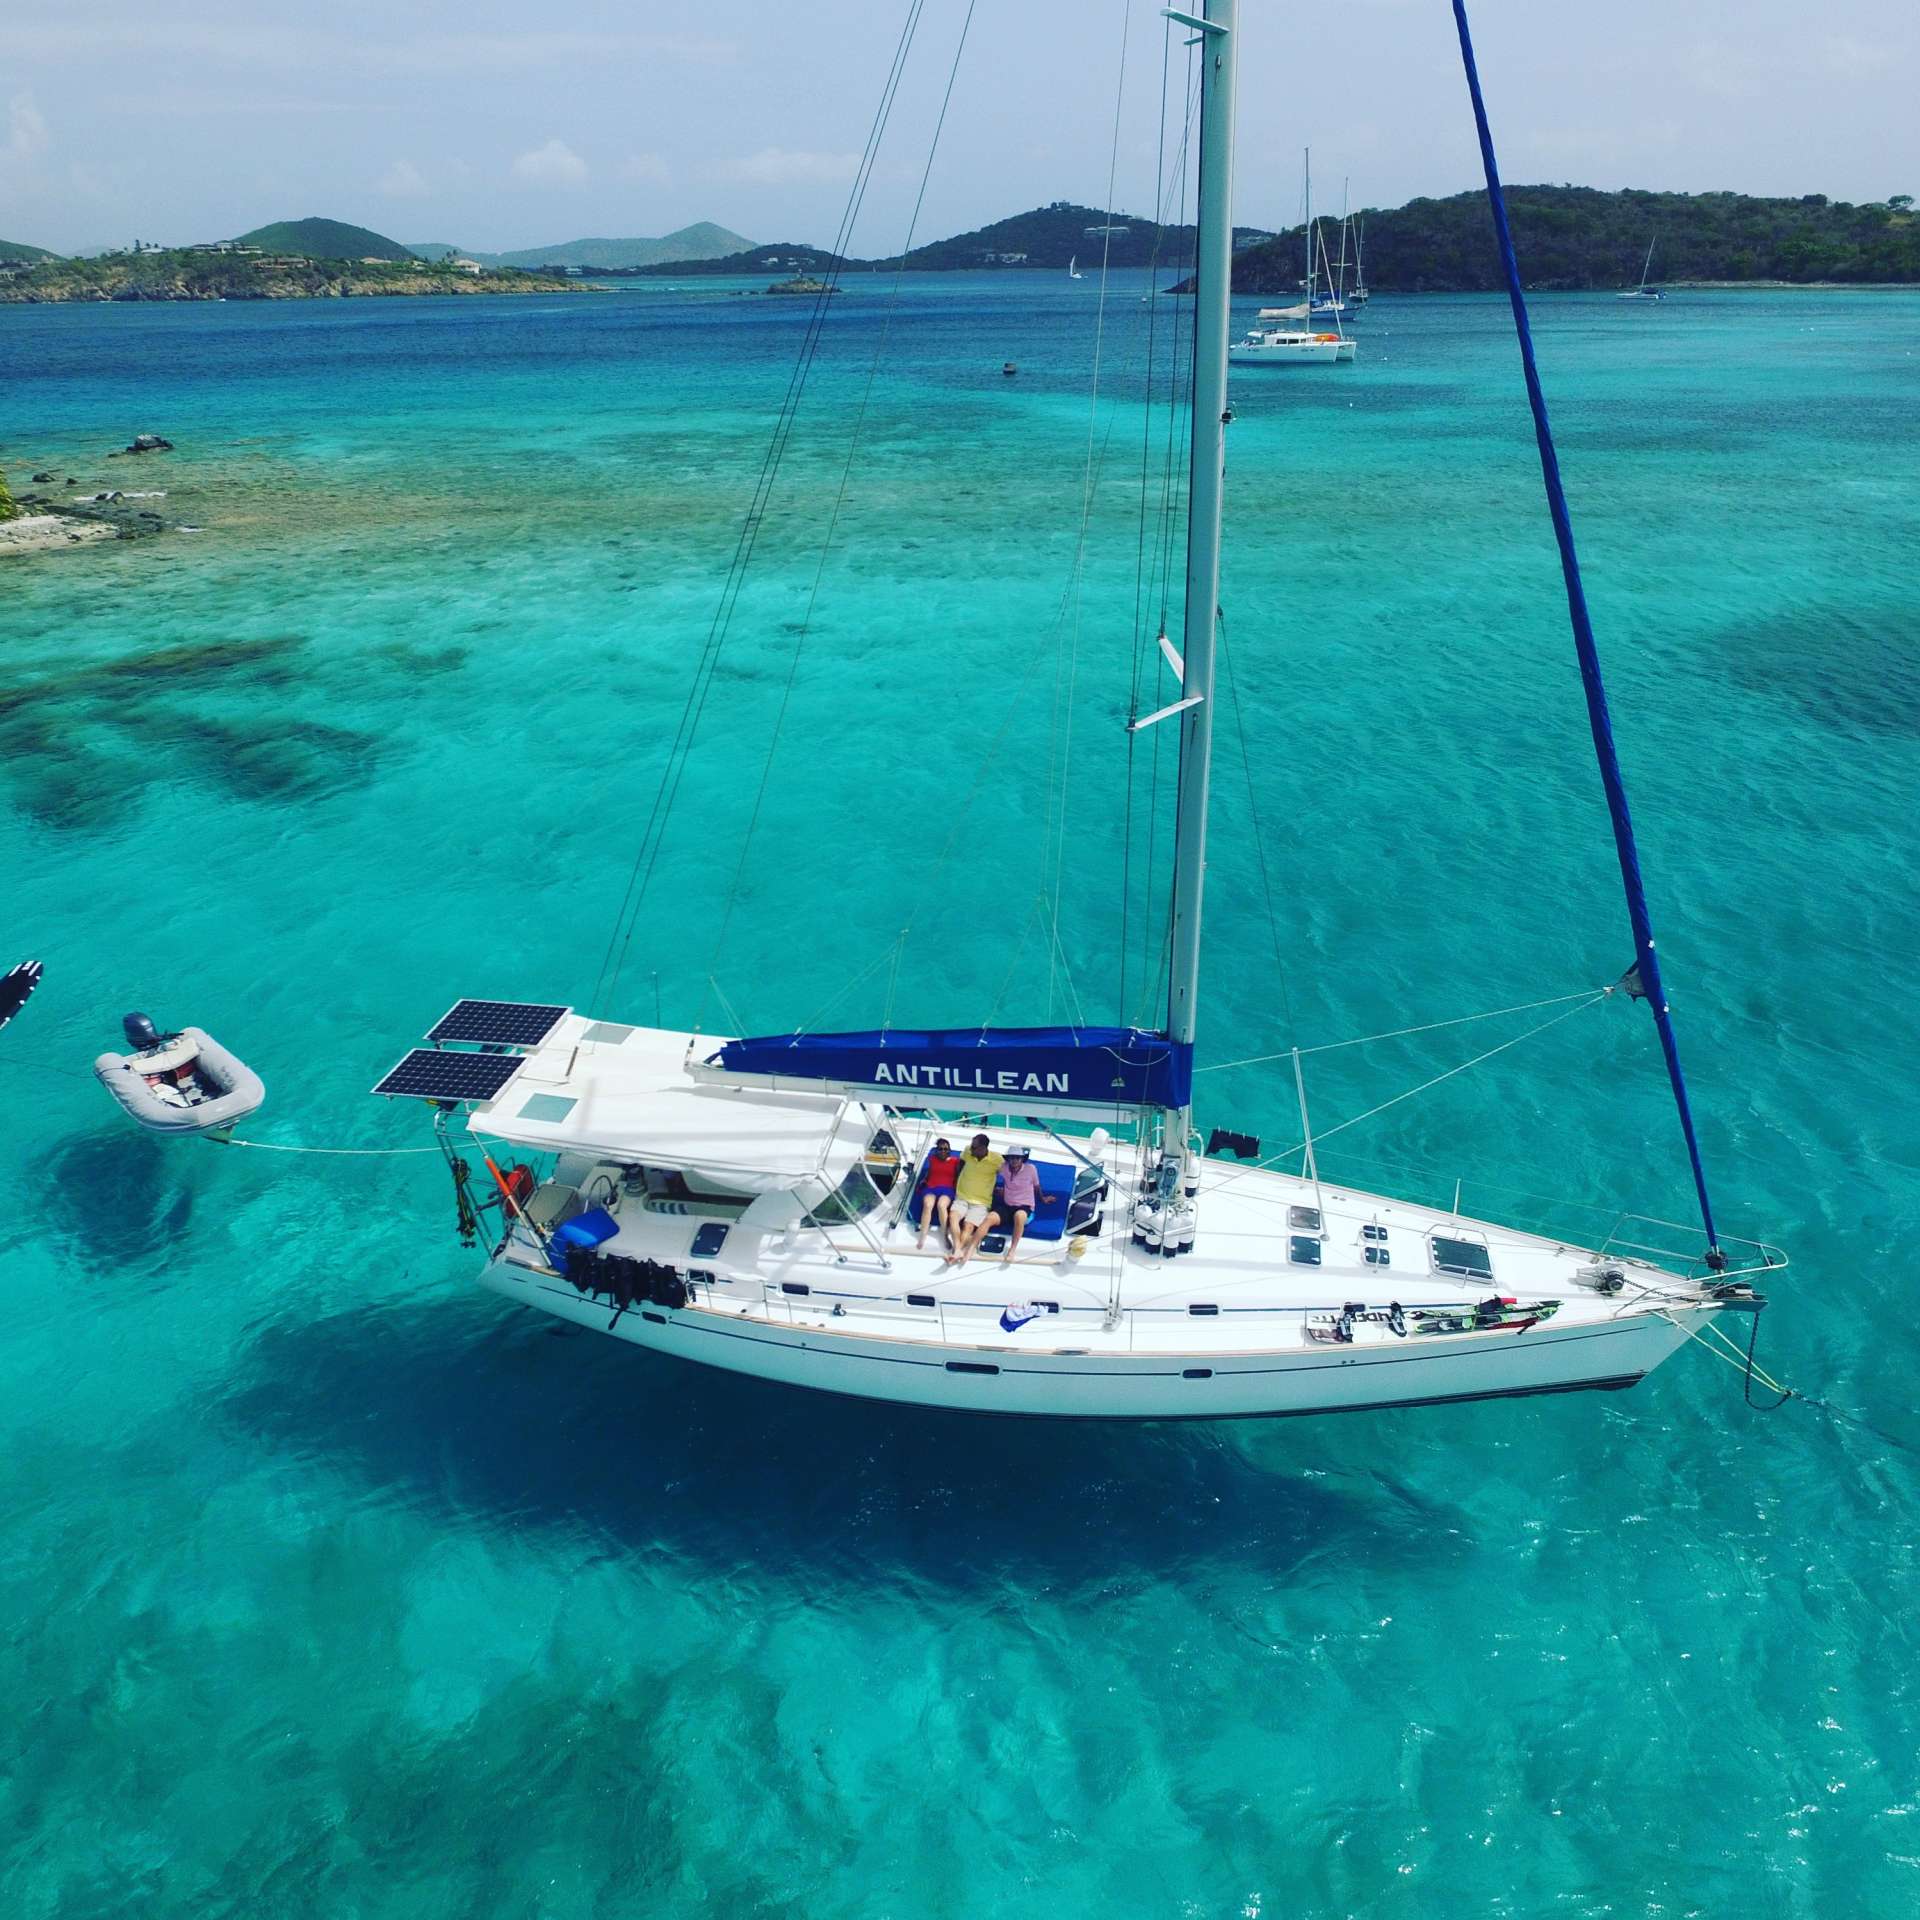 Antillean crewed Beneteau 50 yacht charter at anchor in the USVI